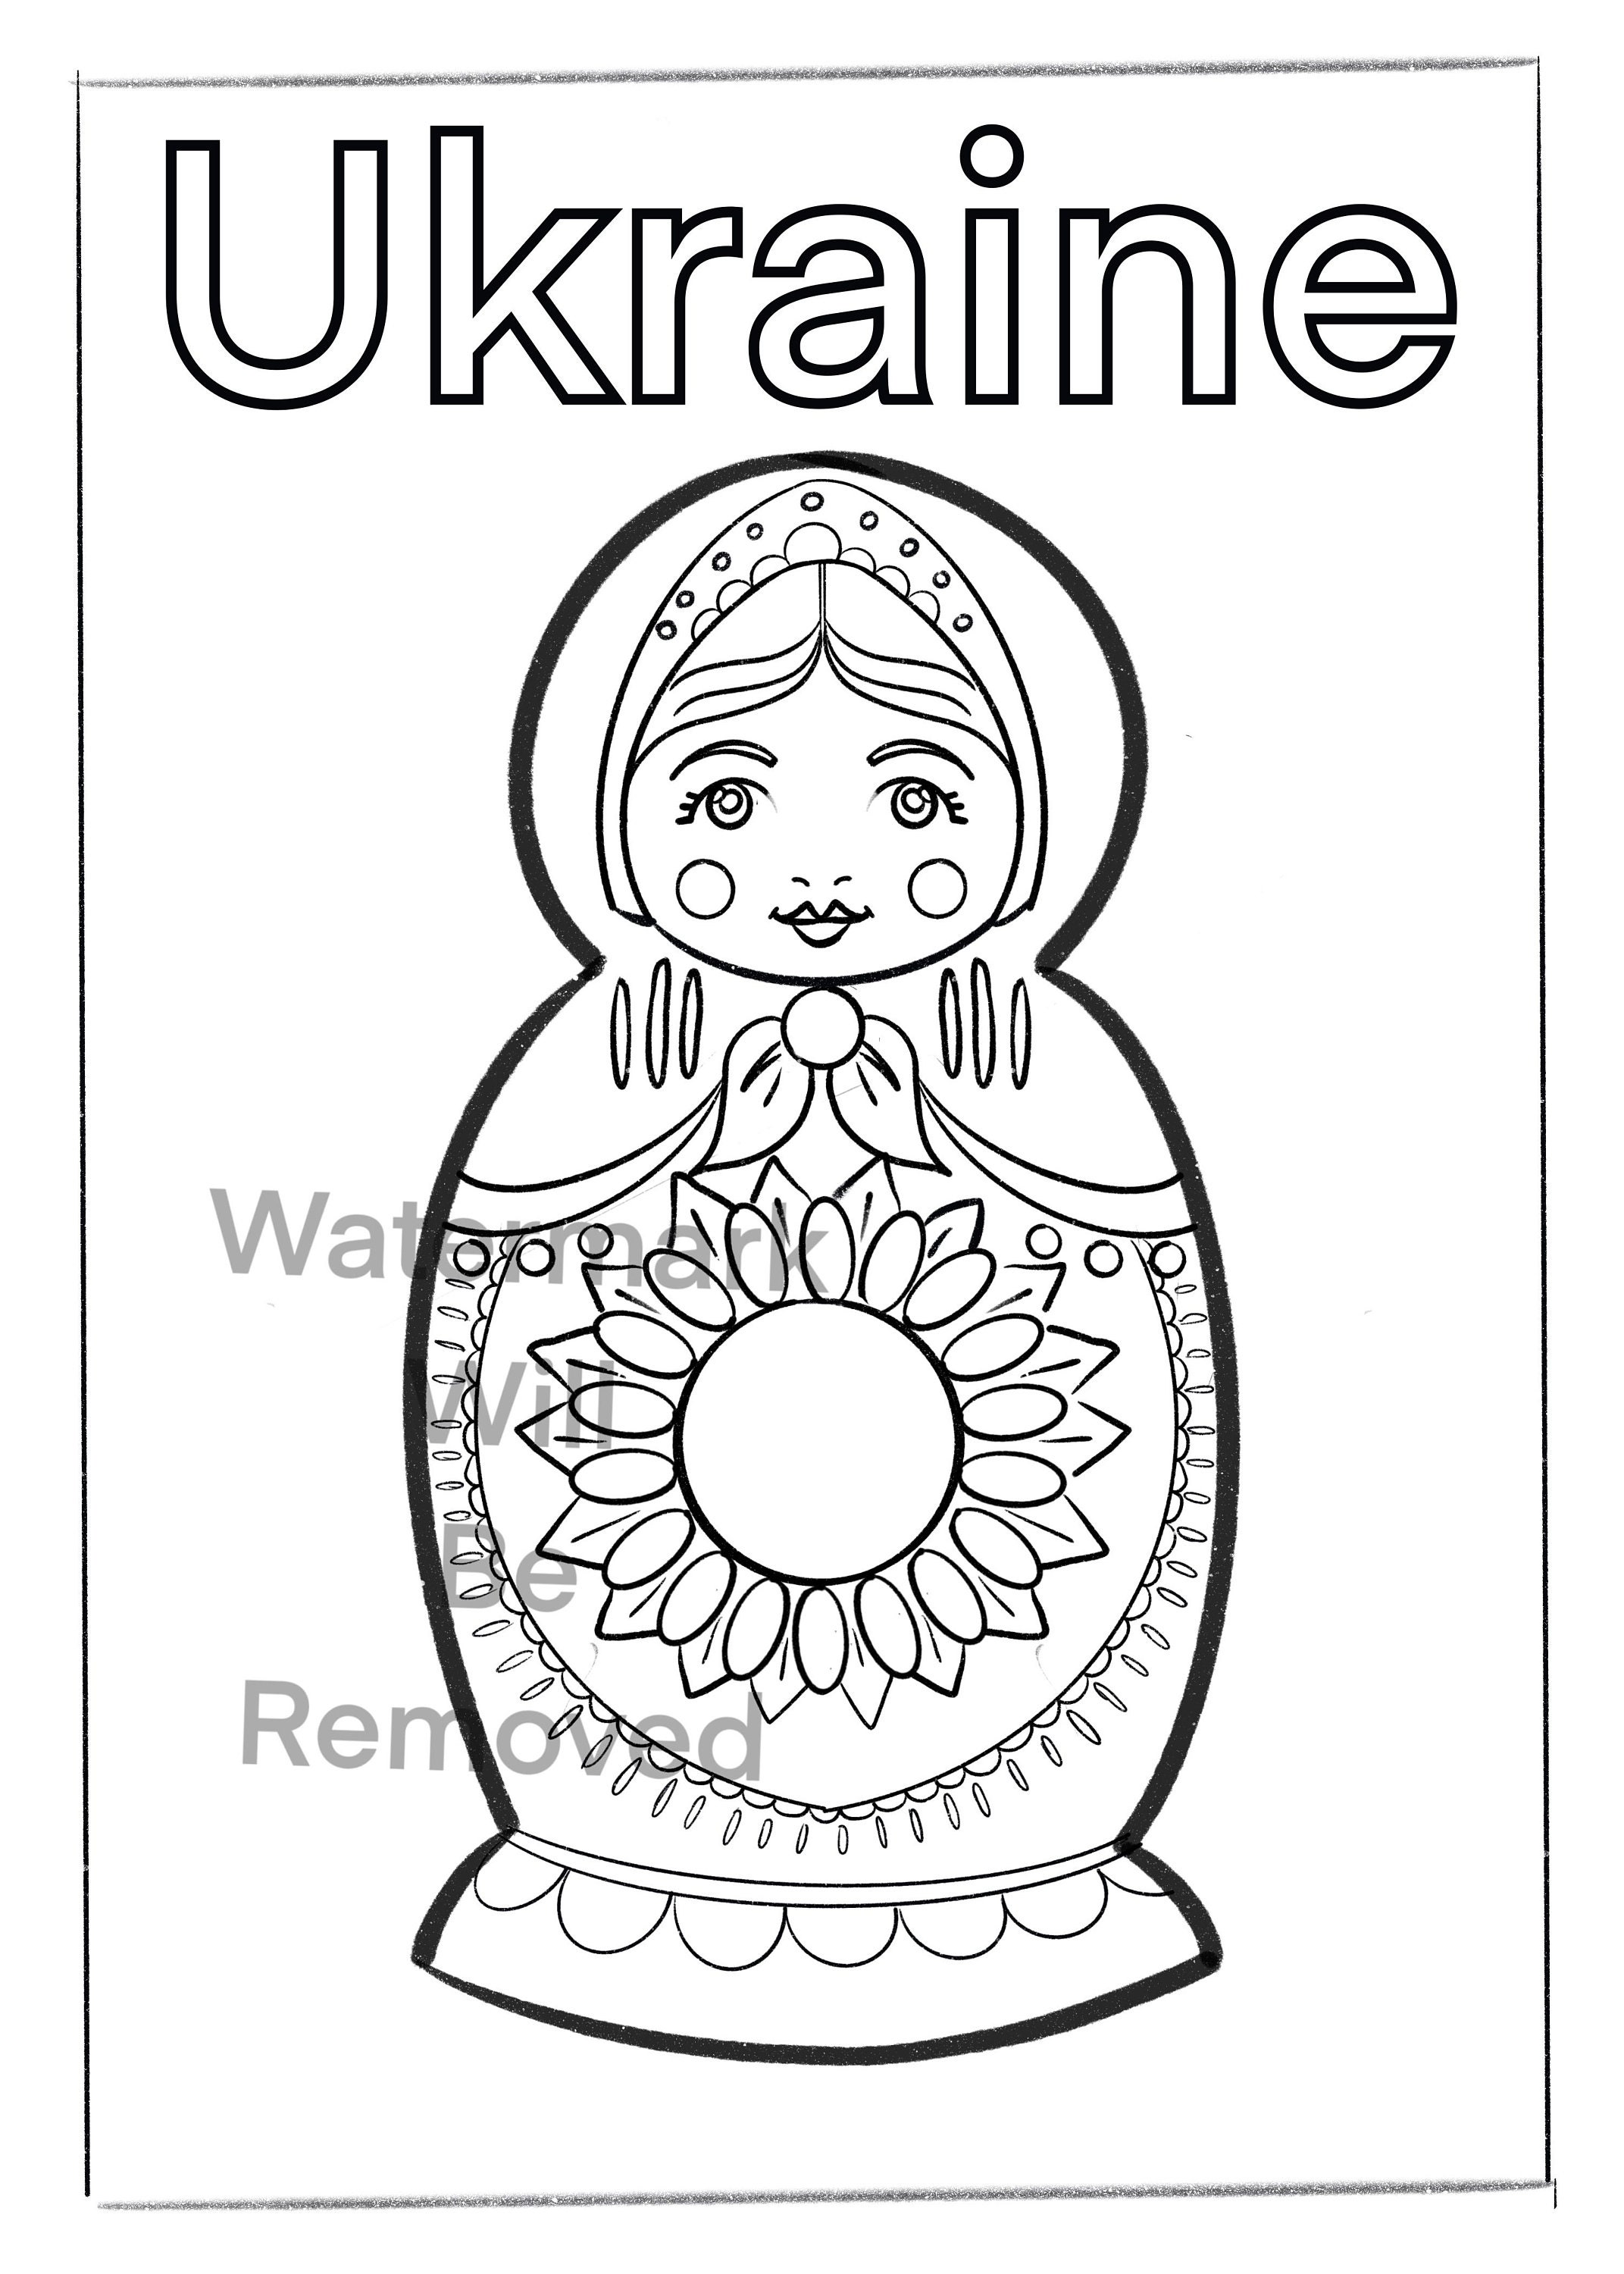 Ukraine coloring page for kids instant download stacking doll with sunflowers activity sheet homeschool elementary preschool curriculum